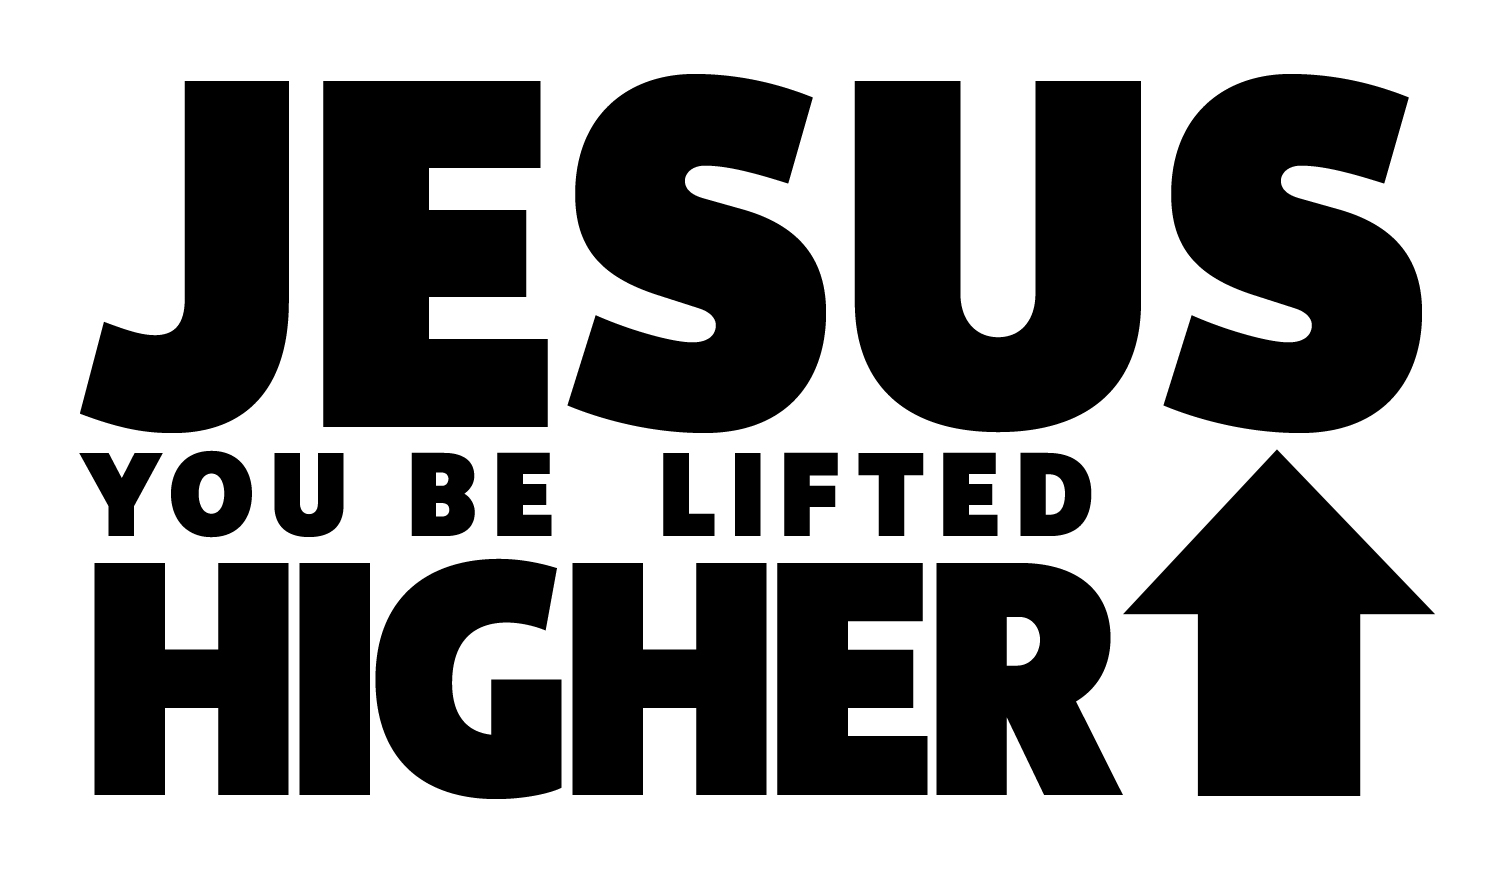 Design as Worship: Jesus you be lifted higher